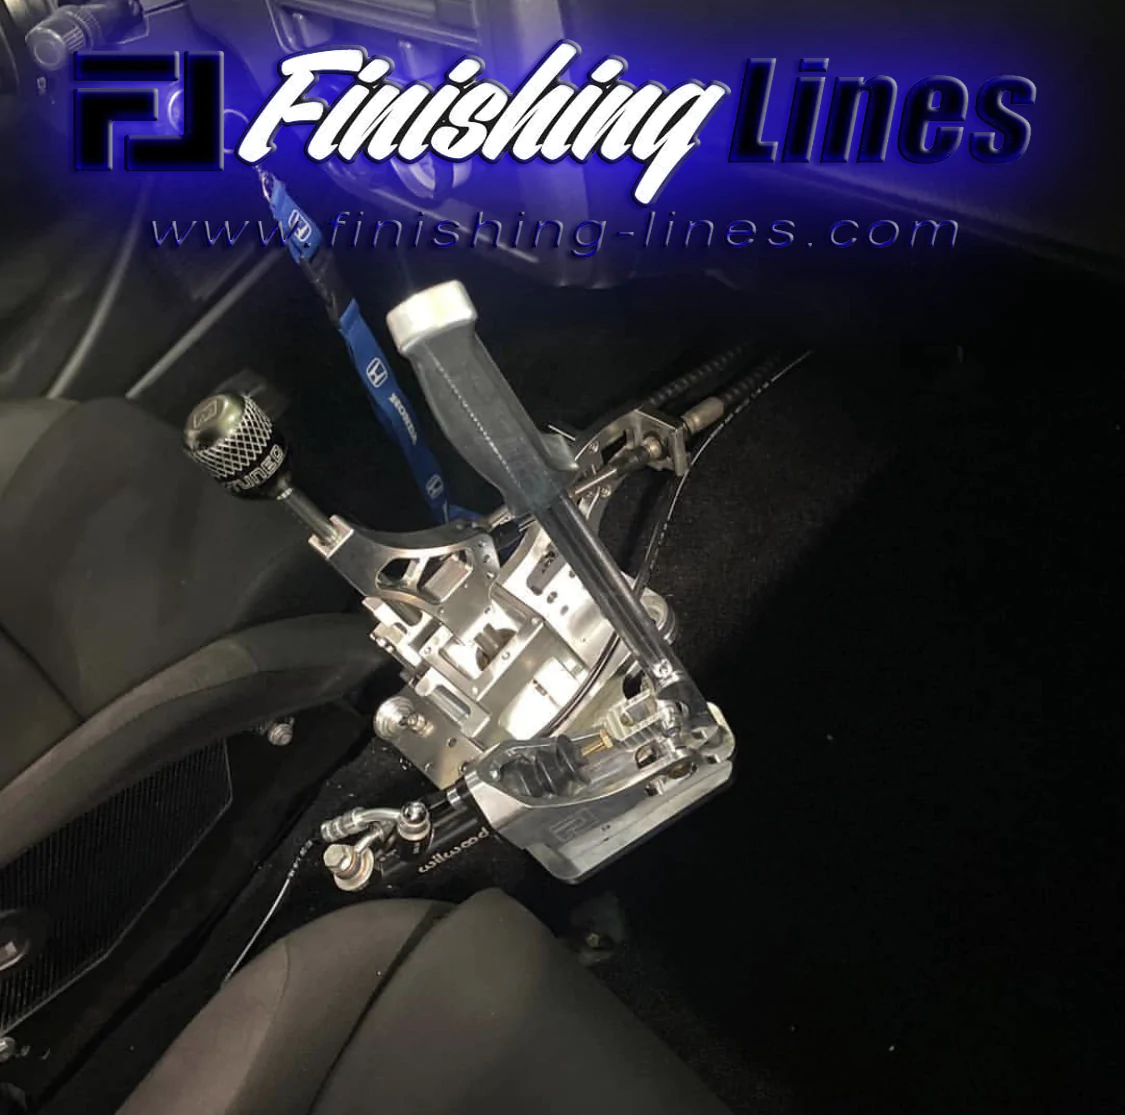 Finishing Lines - EF/CRX Full Tuck with Inline Staging Brake Provision for FL or Wilwood Hand Brake